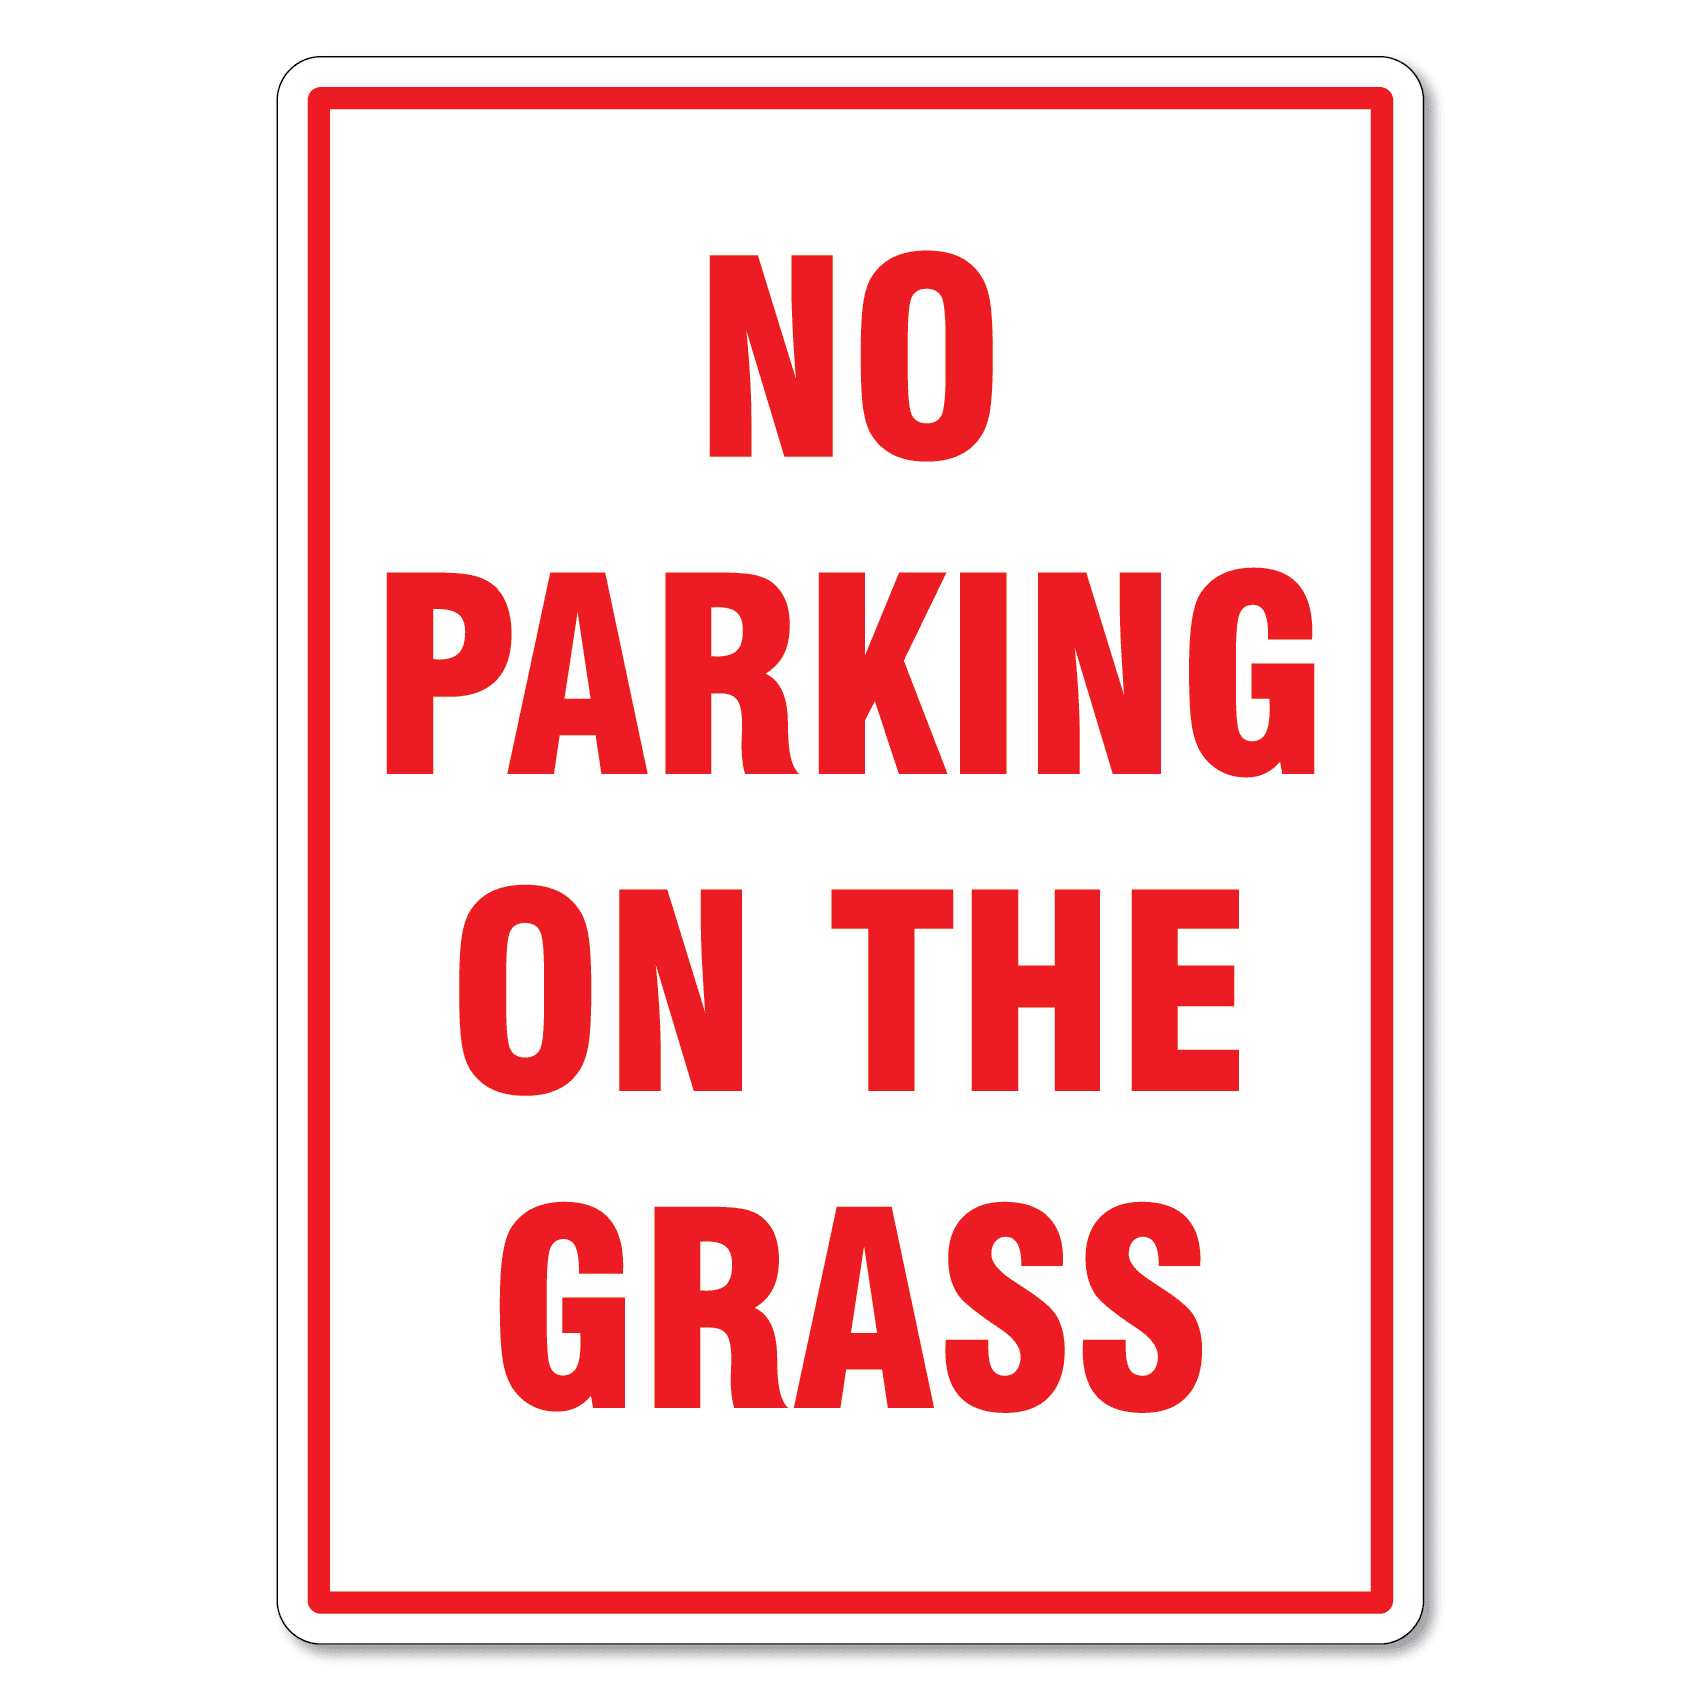 No Parking On the Grass Sign - The Signmaker